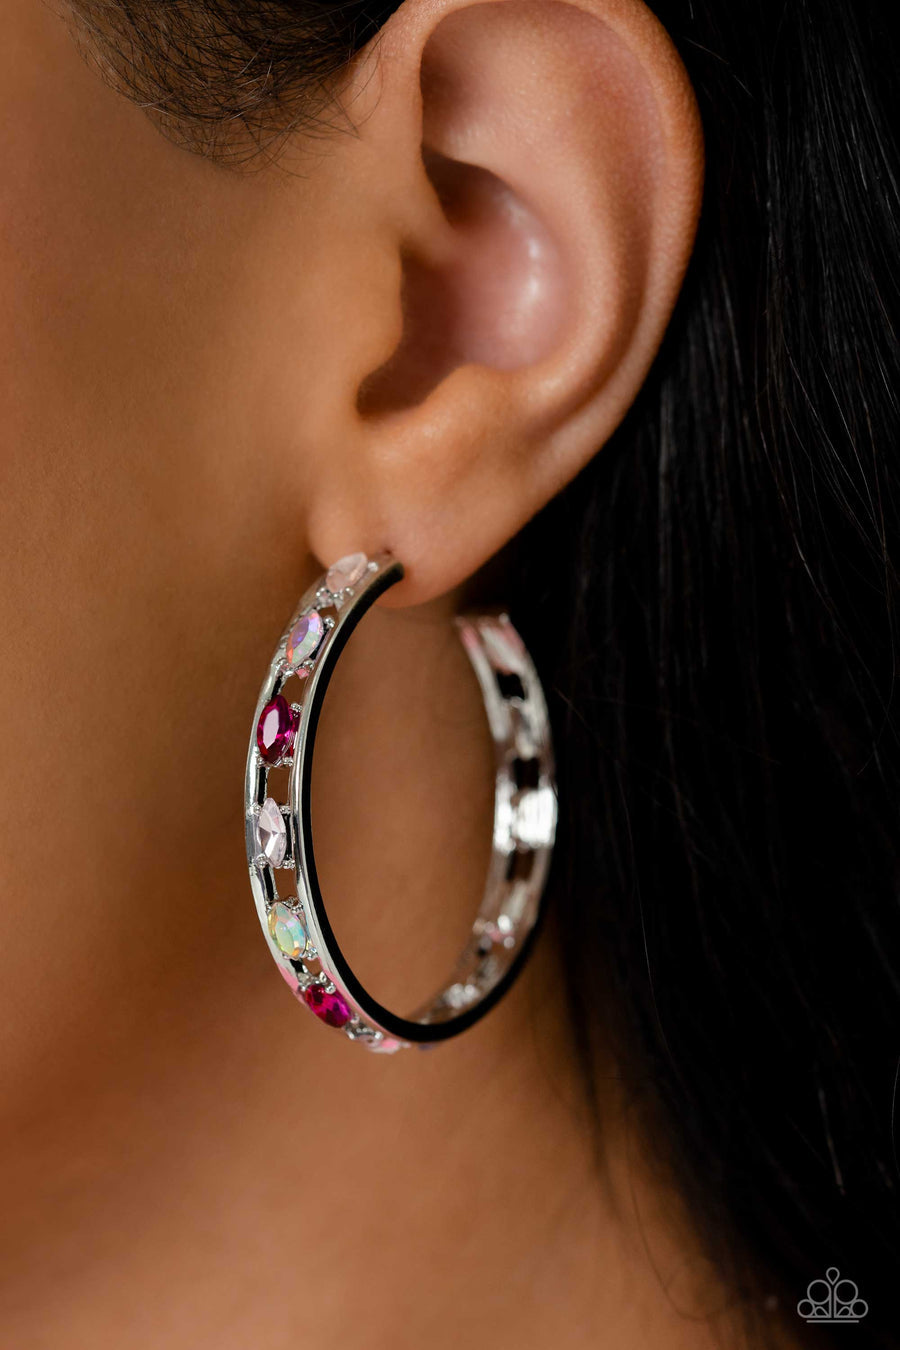 The Gem Fairy - Pink Hoop Earrings - Paparazzi Accessories - Dainty marquise-cut gems in varying finishes of pink fall in line between two bars of silver, creating an airy hoop as they curl around the ear. Earring attaches to a standard post fitting. Hoop measures approximately 1.75" in diameter.